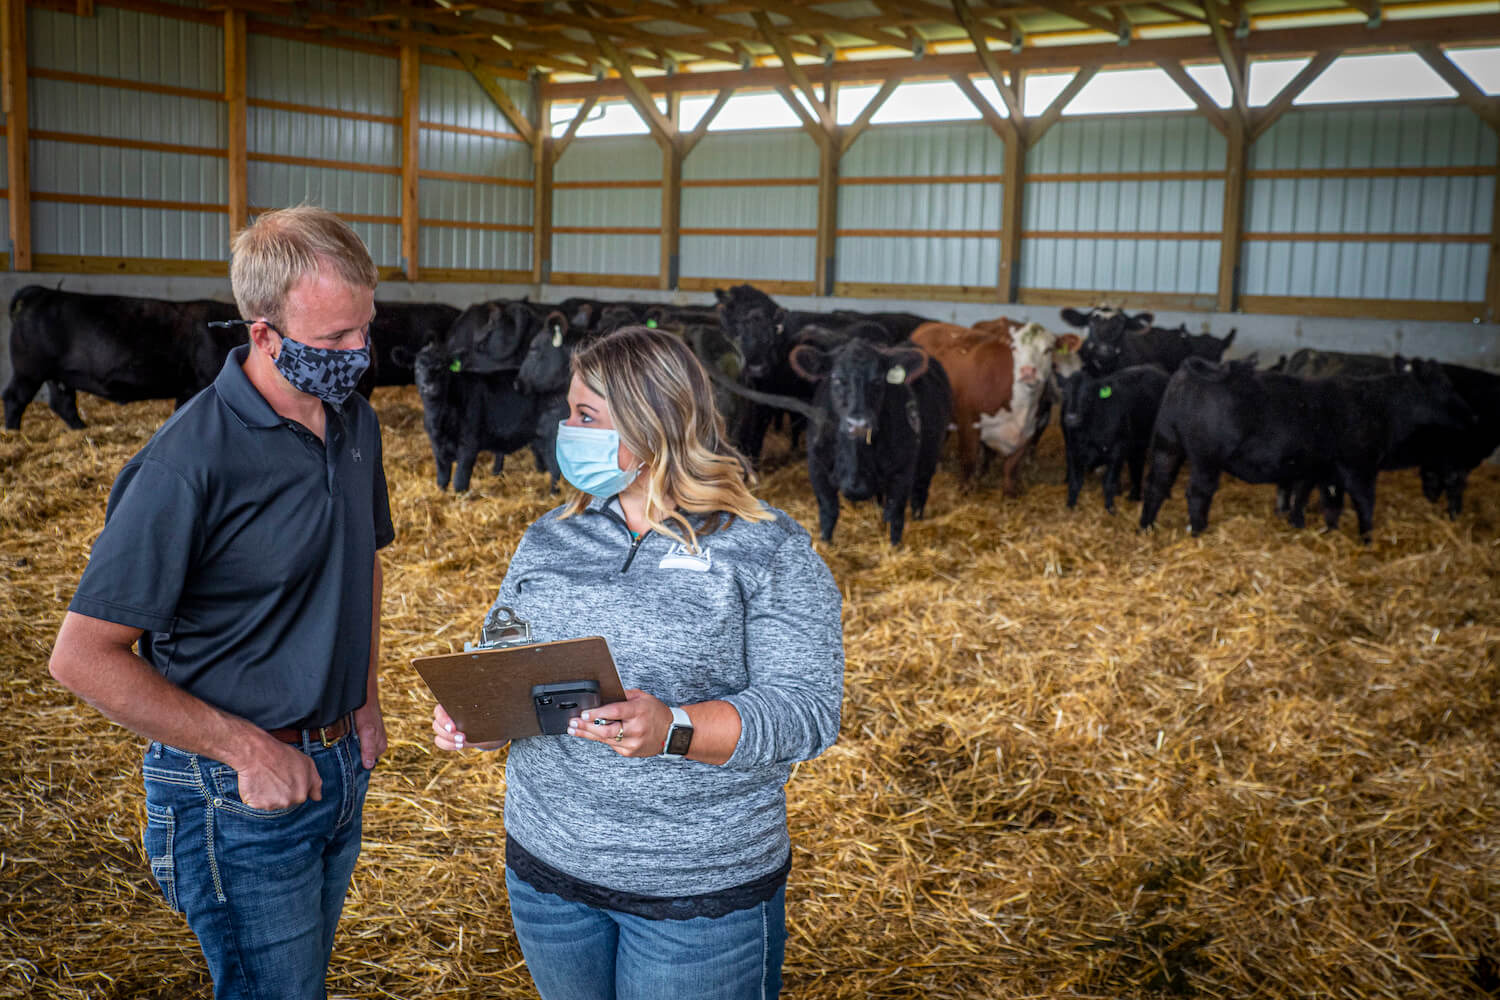 Queen Anne’s County Maryland Farm Service Agency Key Program Technician Jessica Clarke talks with Ethan Whiteside, Owner/Operator of WF Angus who has an active Environmental Quality Incentives Program (EQUIP) contract with NRCS and recently applied for FSA’s Coronavirus Food Assistance Program. September 2020